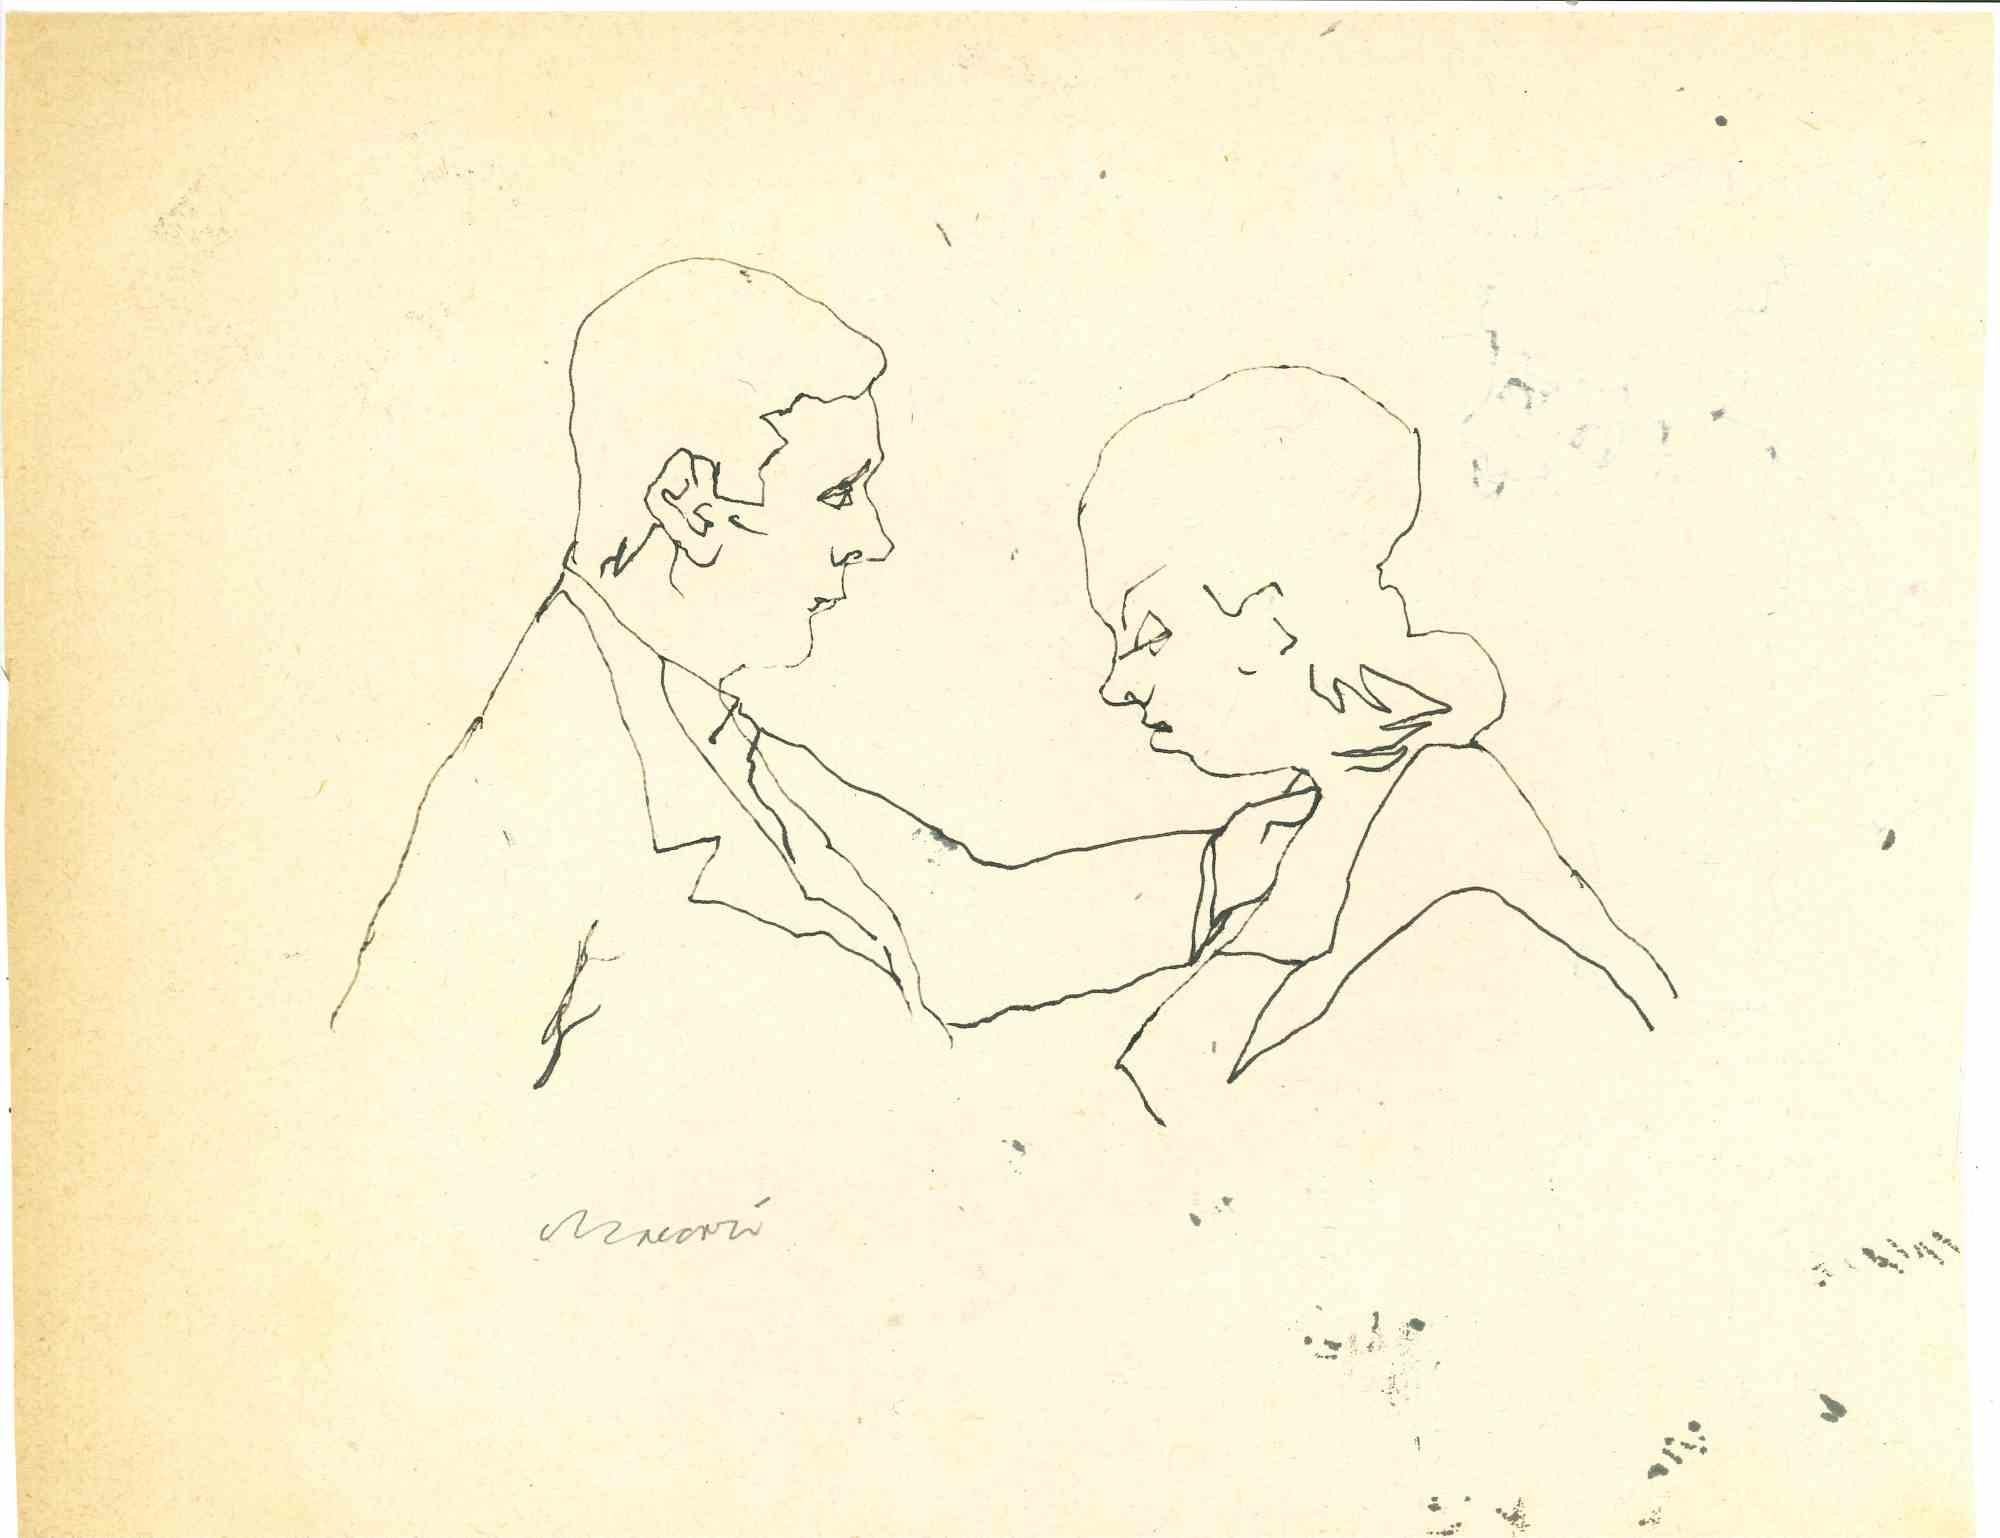 Conversation is a china ink drawing realized by Mino Maccari  (1924-1989) in the Mid-20th Century.

Hand-signed.

Good conditions with slight foxing.

Mino Maccari (Siena, 1924-Rome, June 16, 1989) was an Italian writer, painter, engraver and